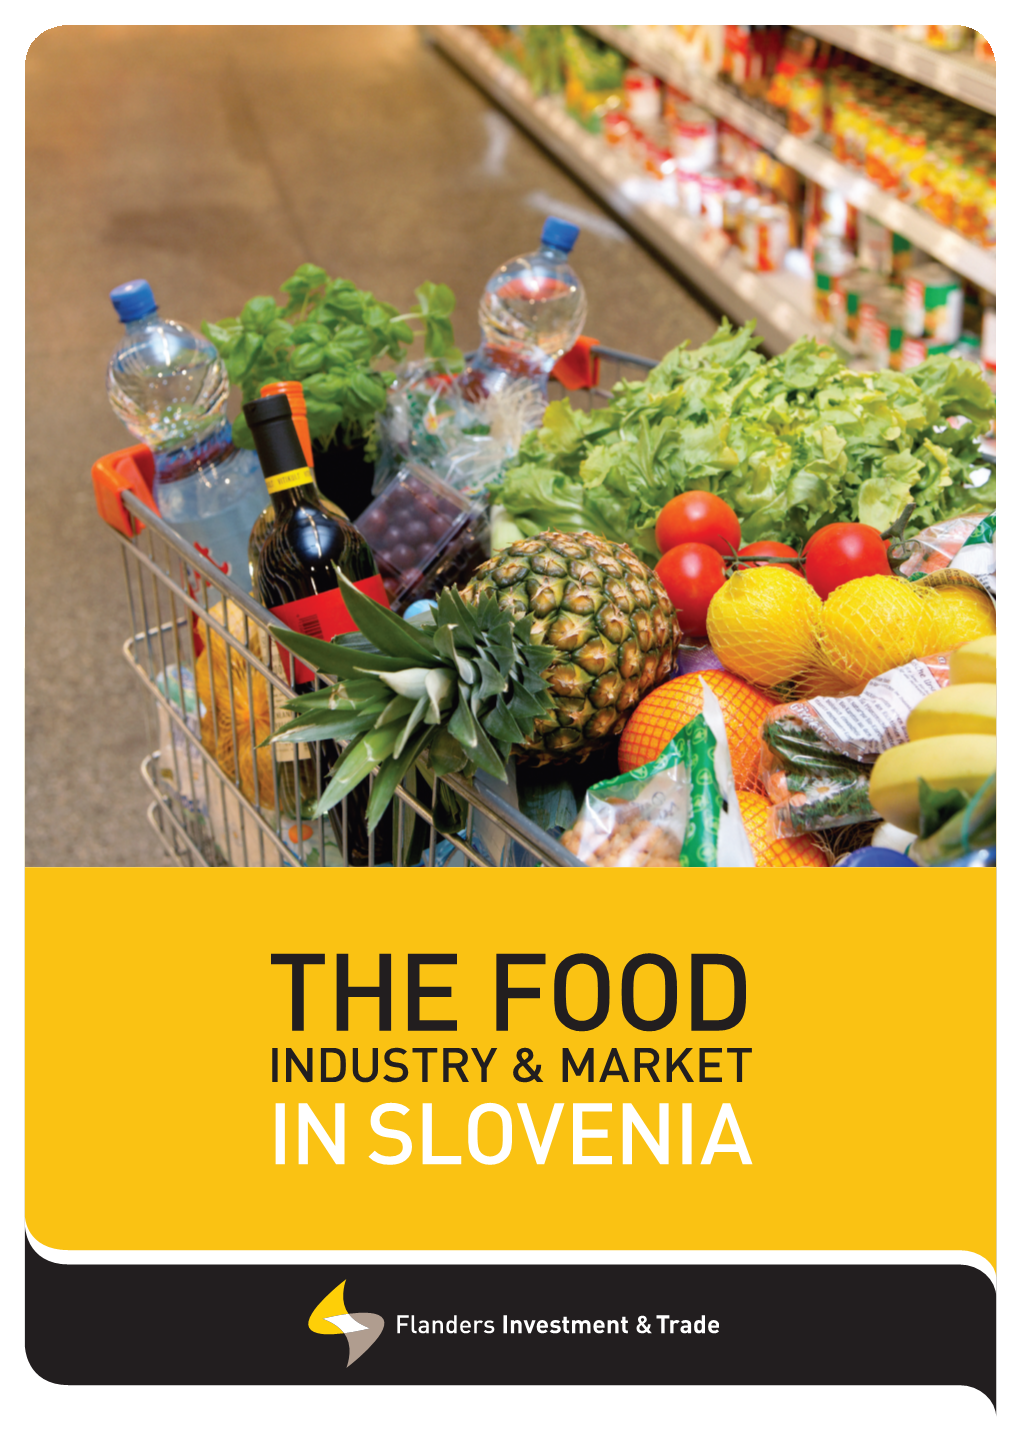 The Food Industry & Market in Slovenia